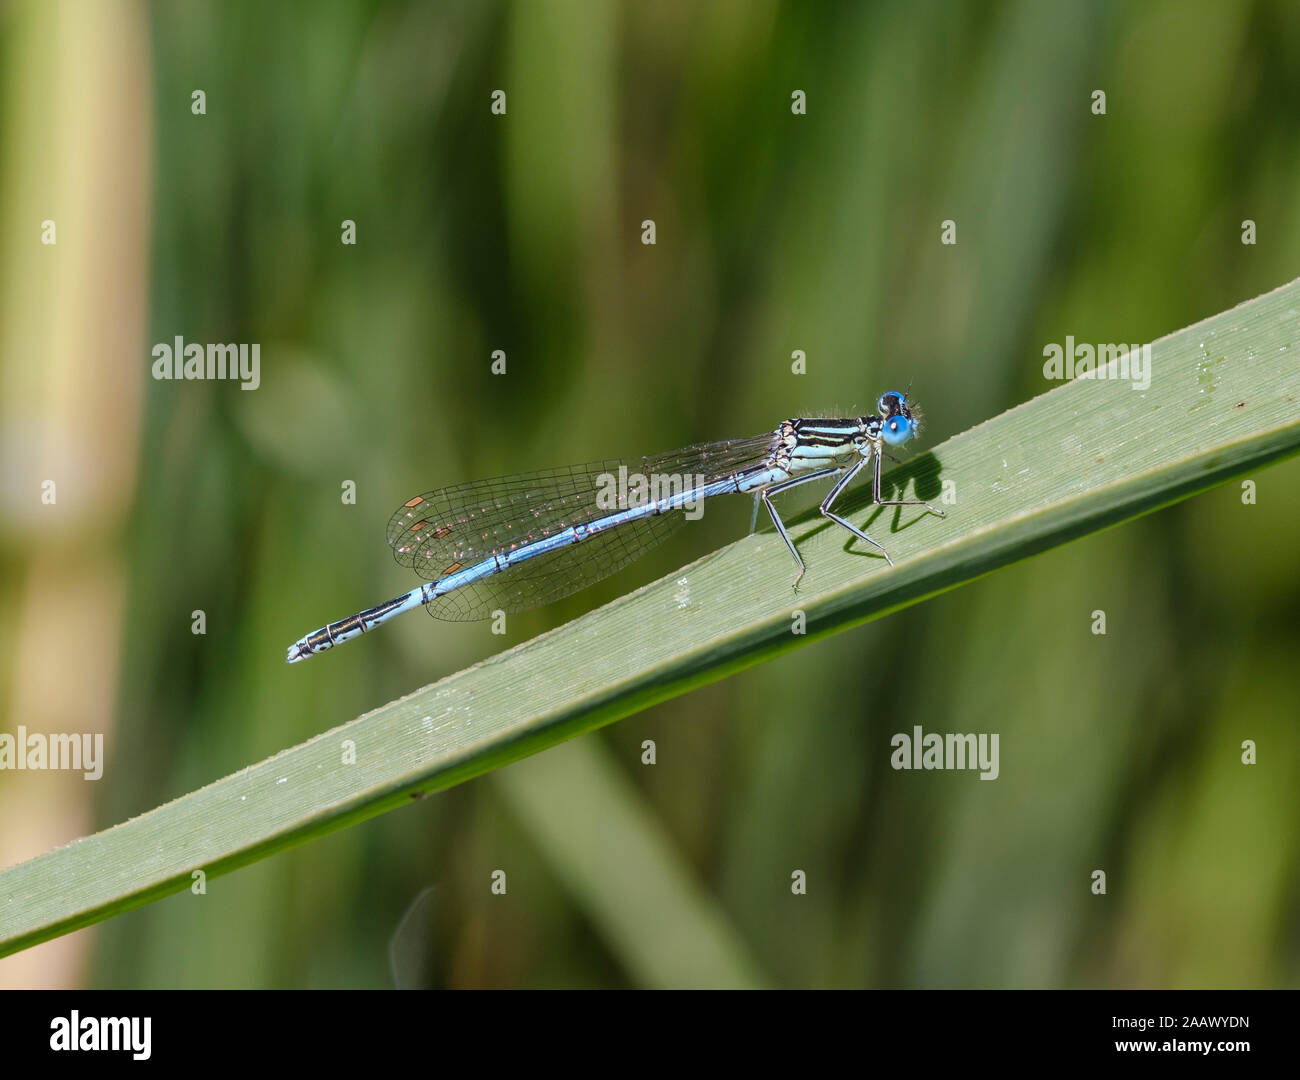 Close-up of blue damselfly on leaf, Stock Photo